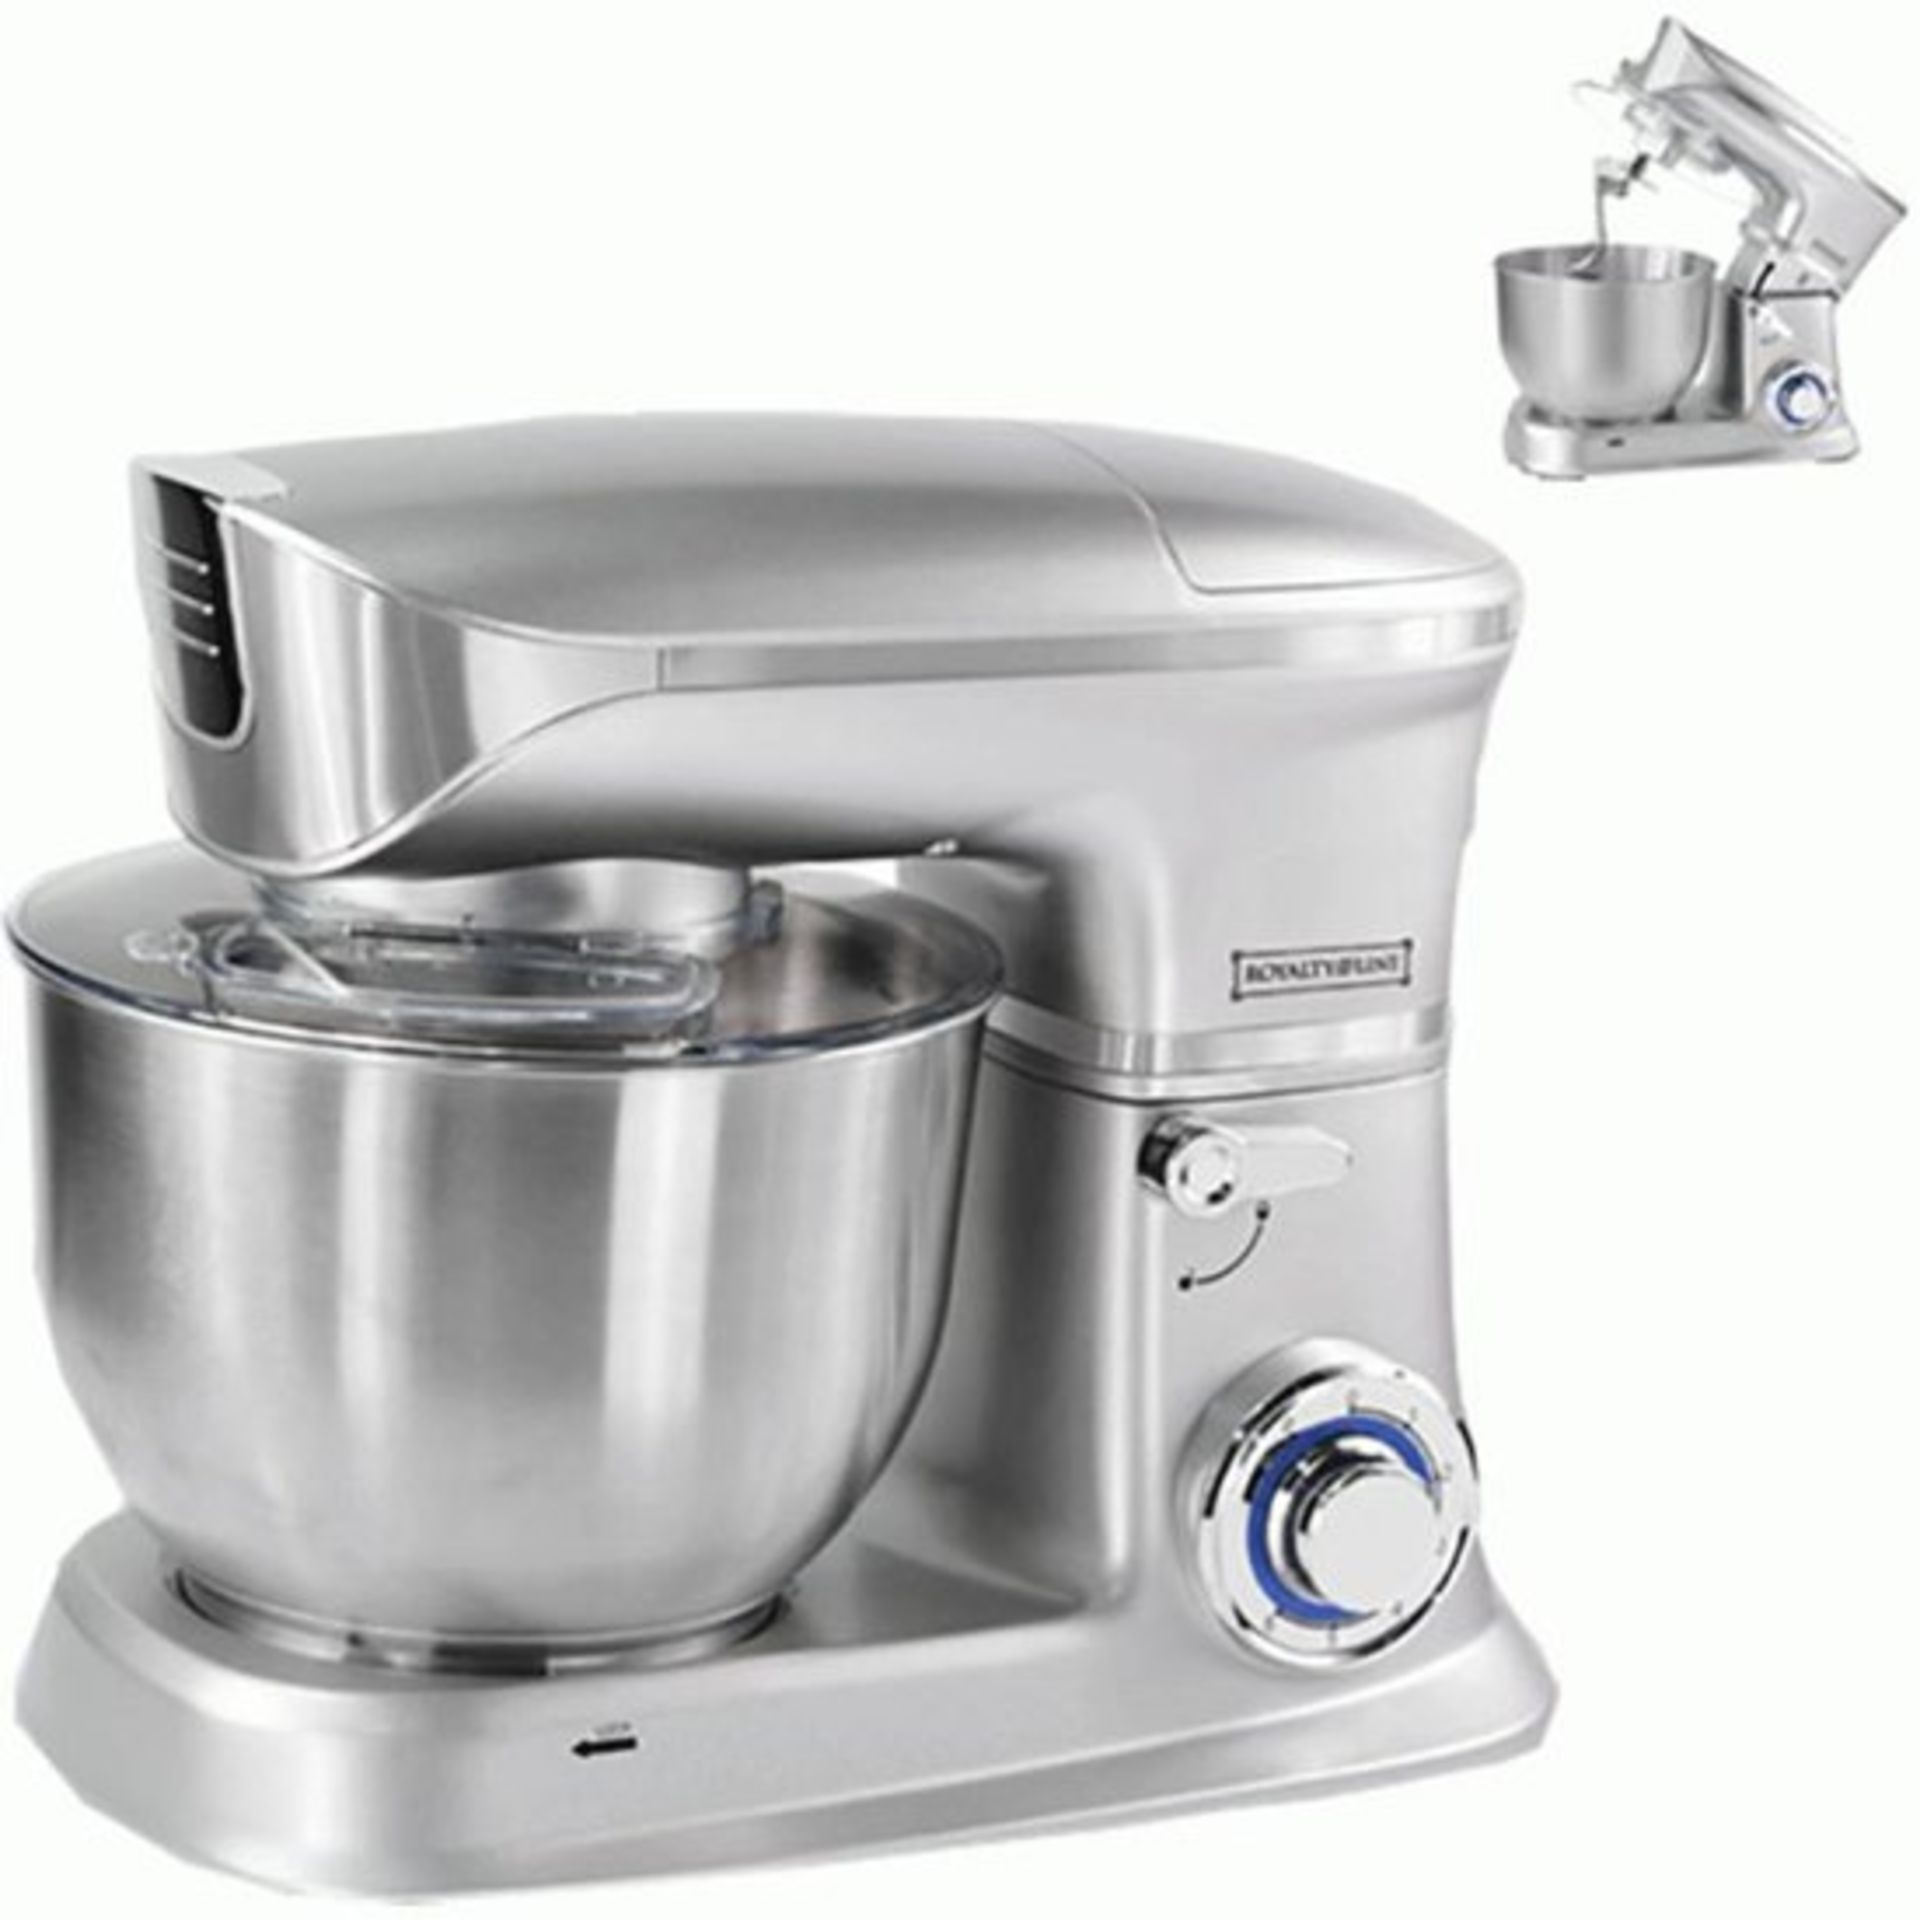 V Brand New 1900w Power Kitchen Mixer - 6.5L Capacity - Stainless Steel Bowl - Three Attachments (